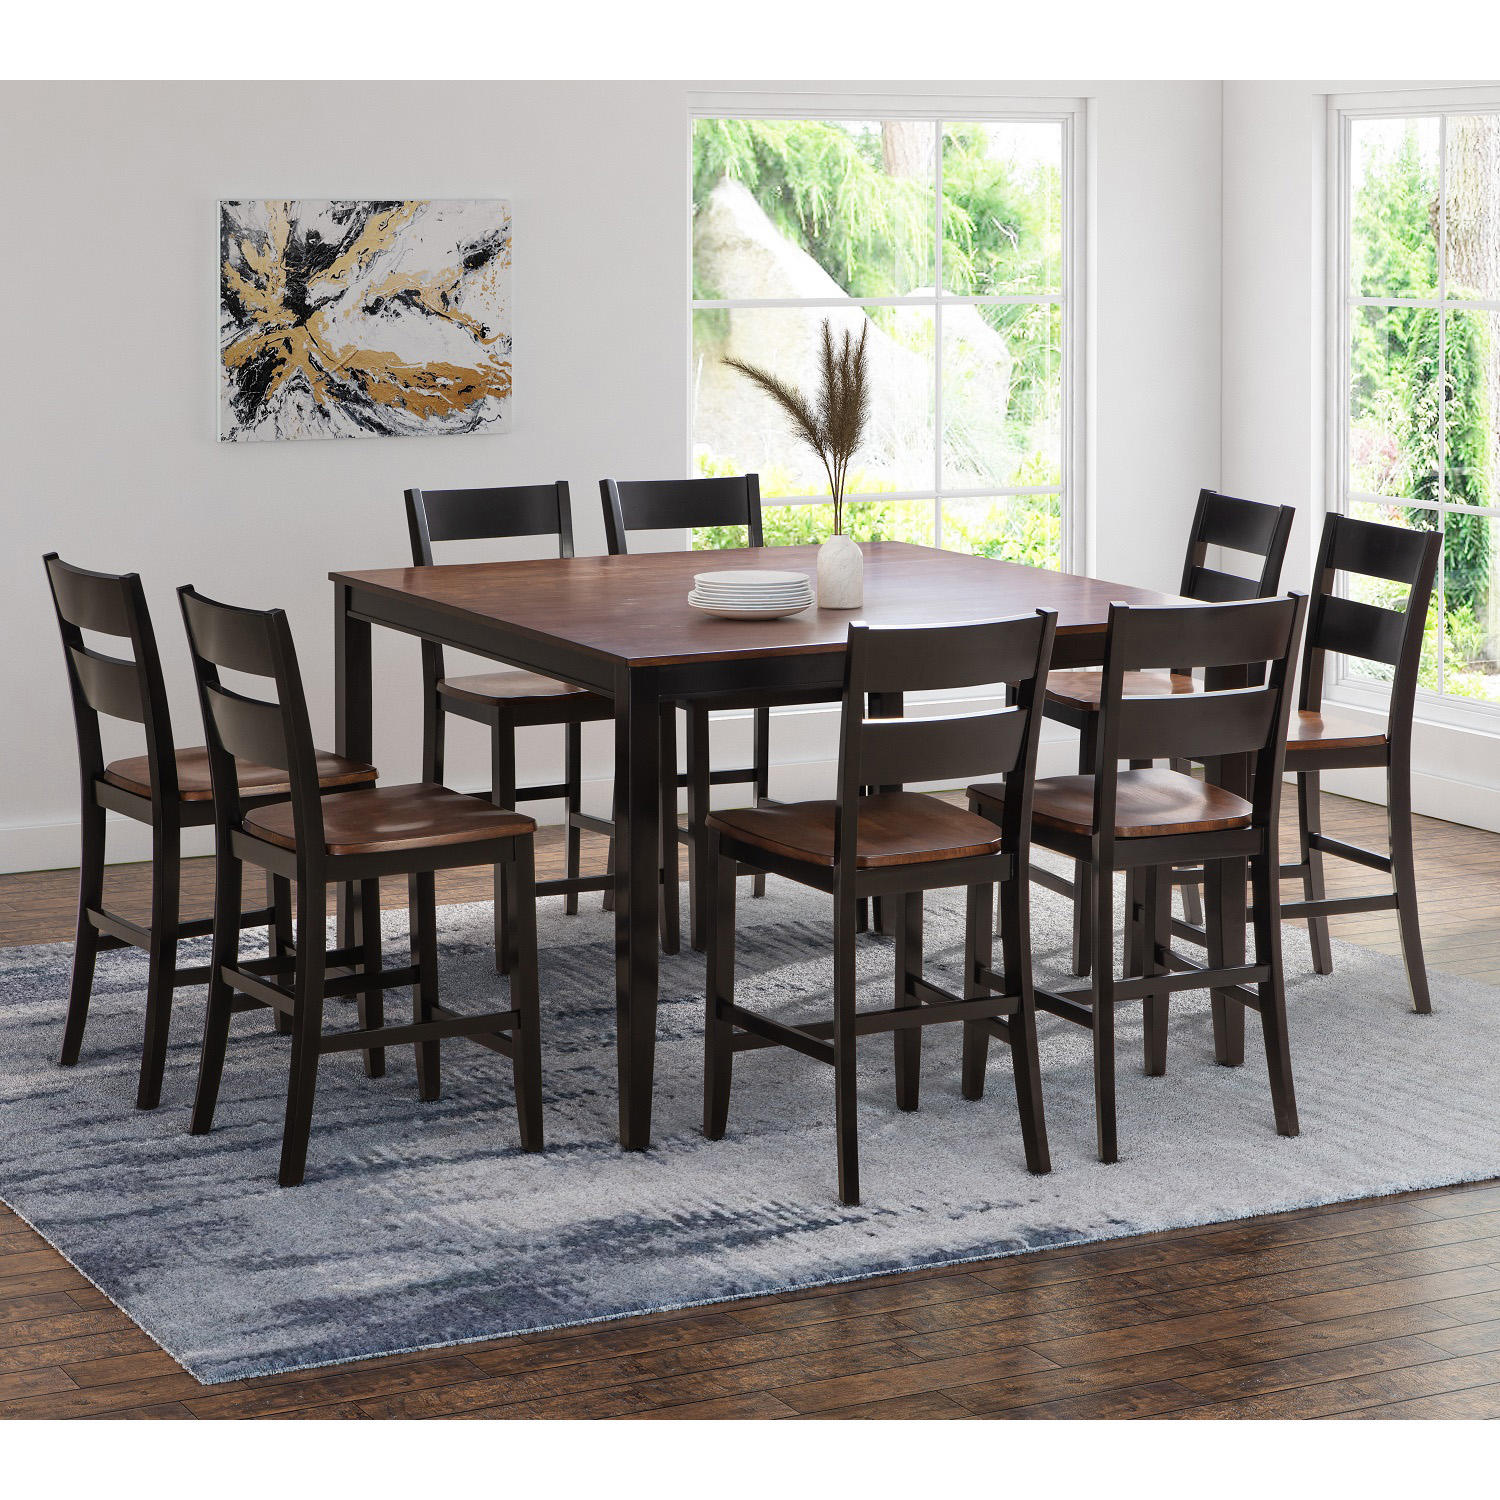 Wesley 9-Piece Counter Height Wood Dining Set by Abbyson Living (WF-650-BRN-9PC)